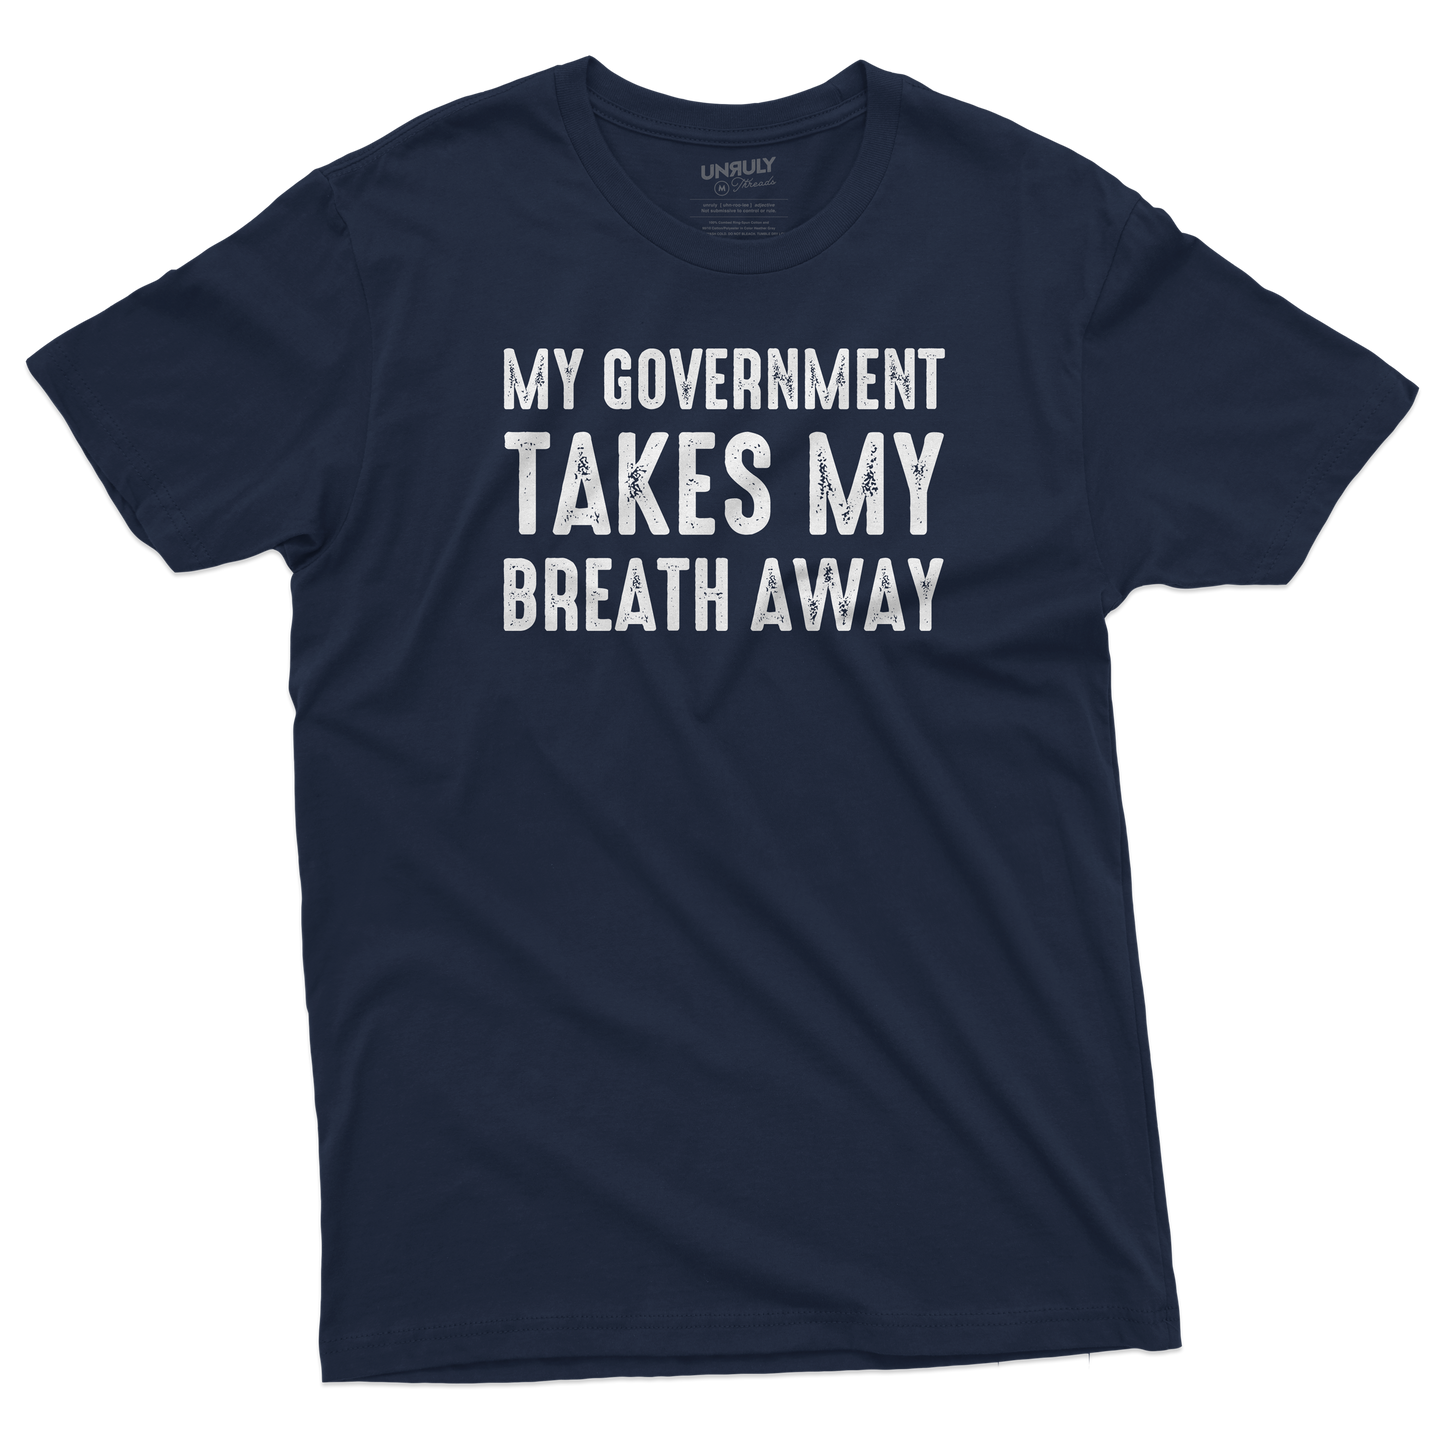 Mens/Unisex My Government Takes My Breath Away Tee - Navy